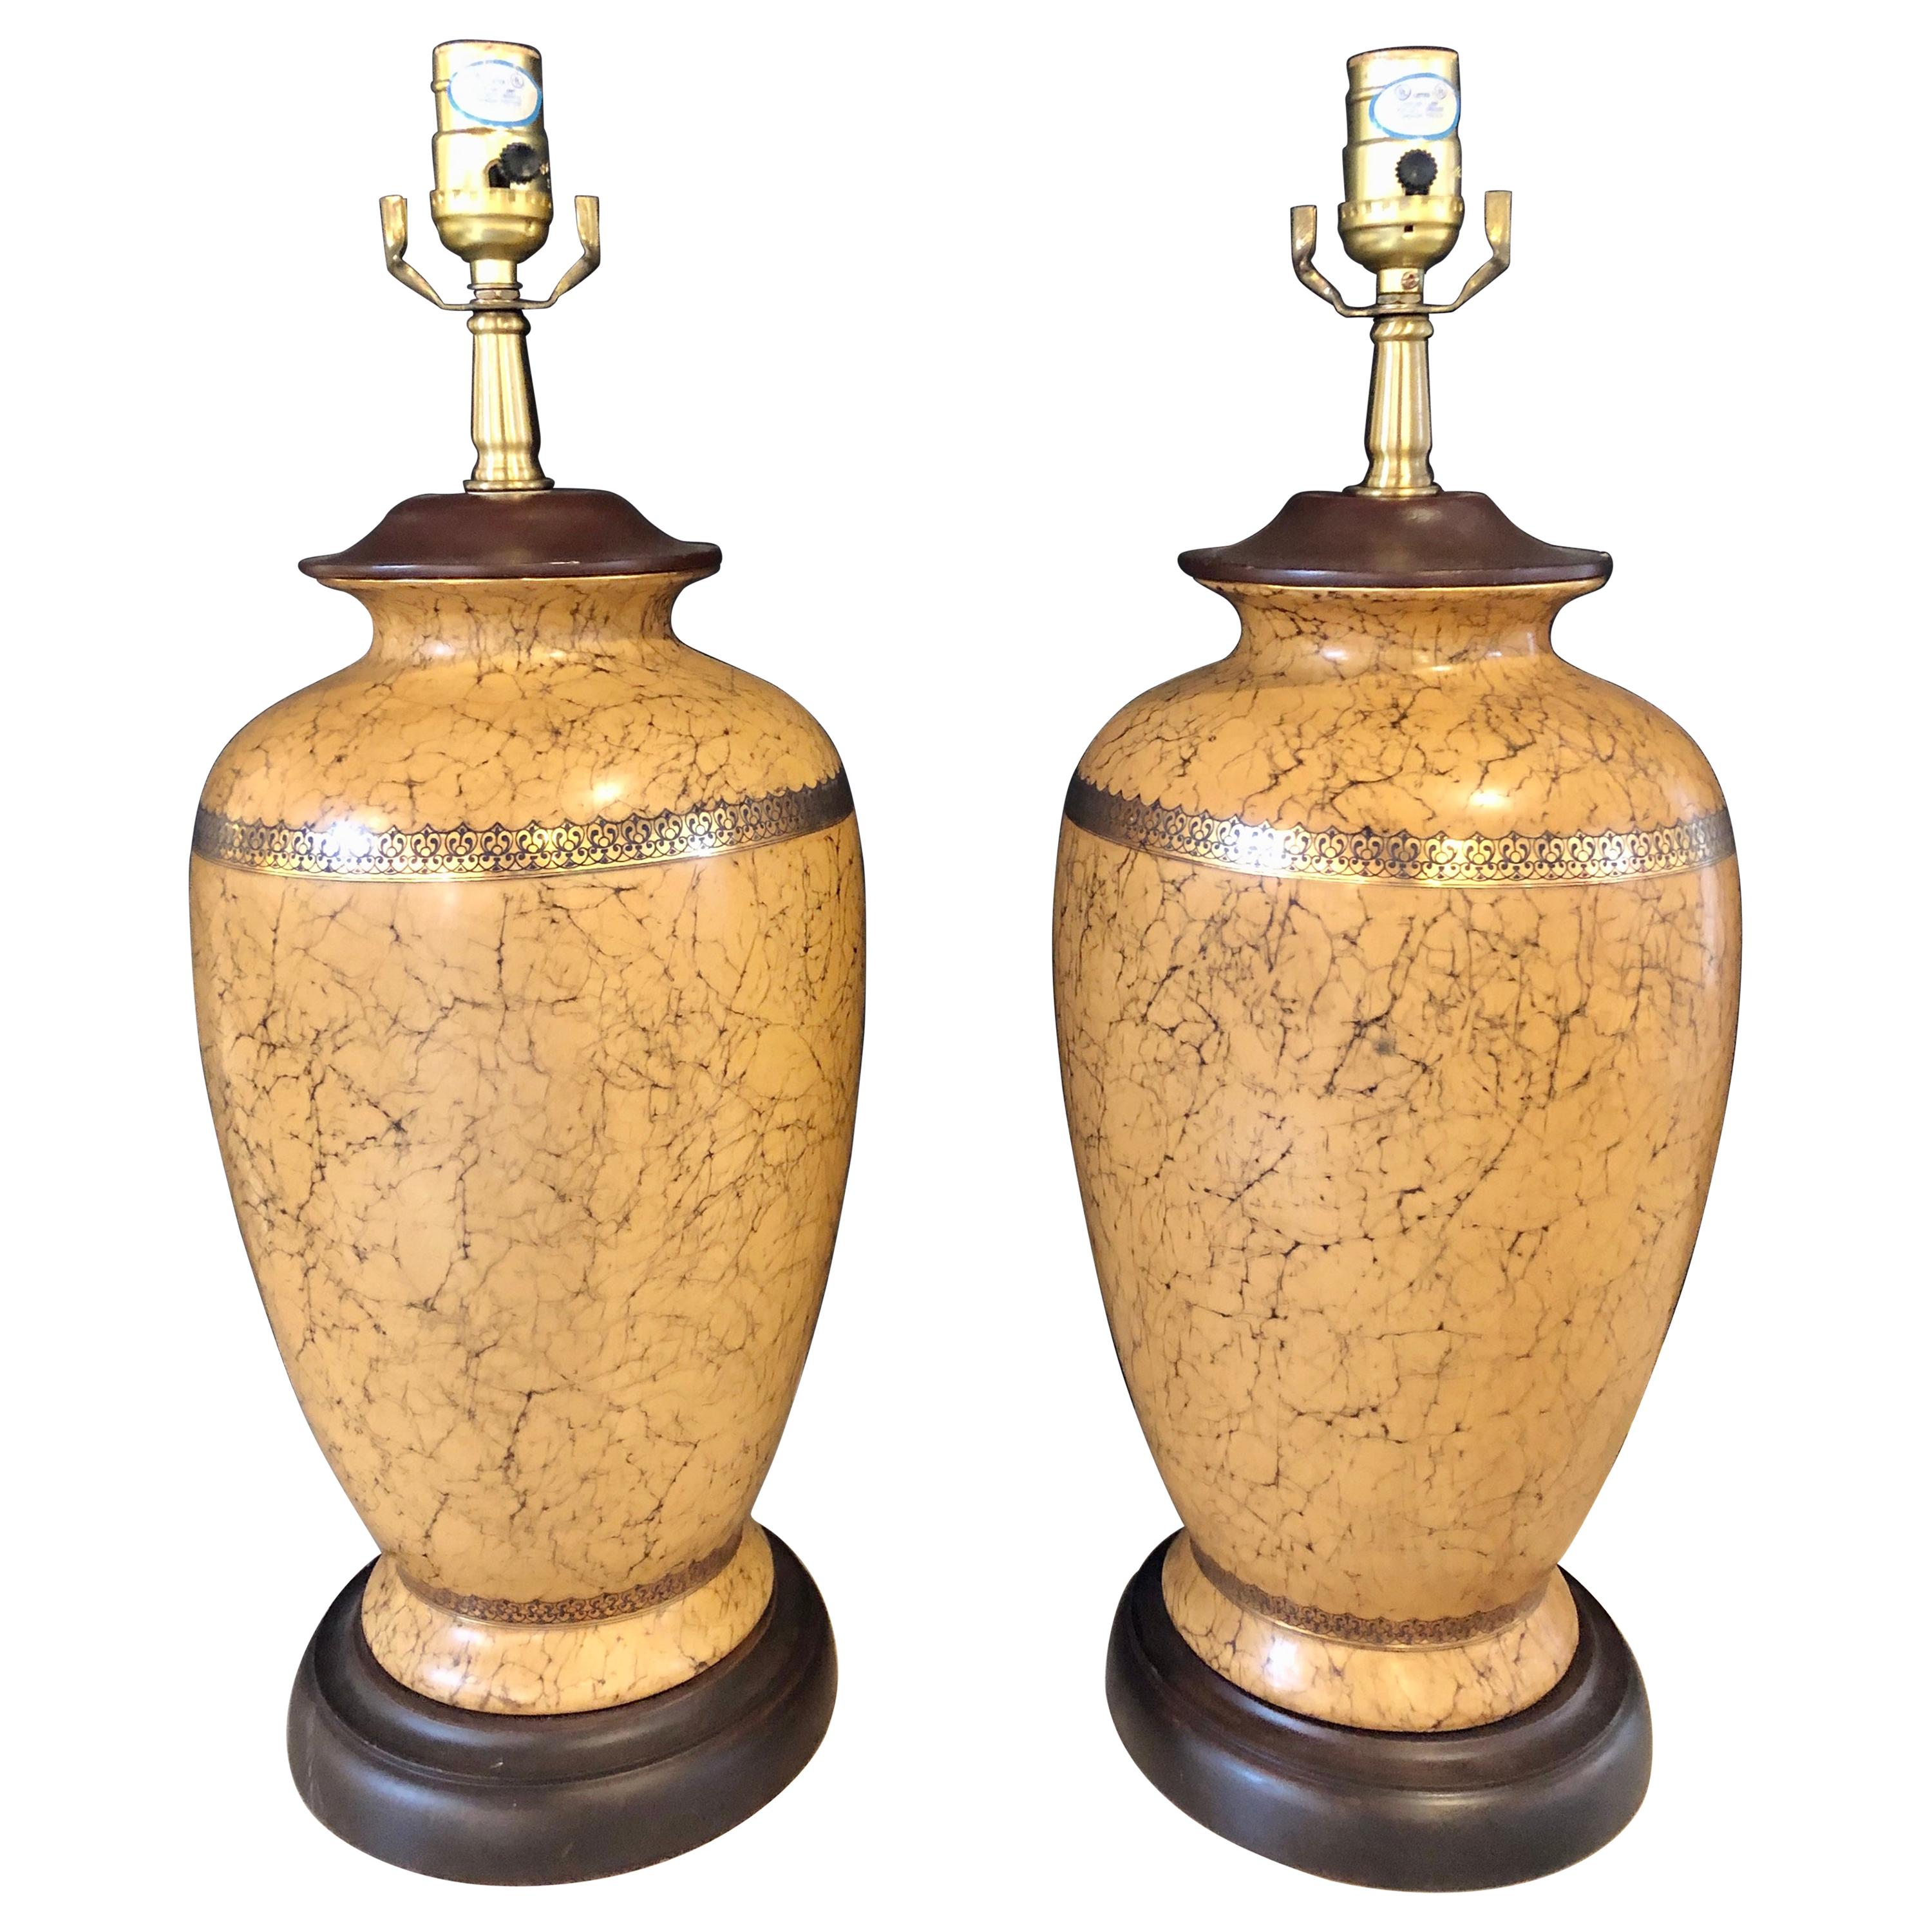 Pair of Ceramic Lamps with Gold Trim and Crackle Finish Wooden Base Bottom